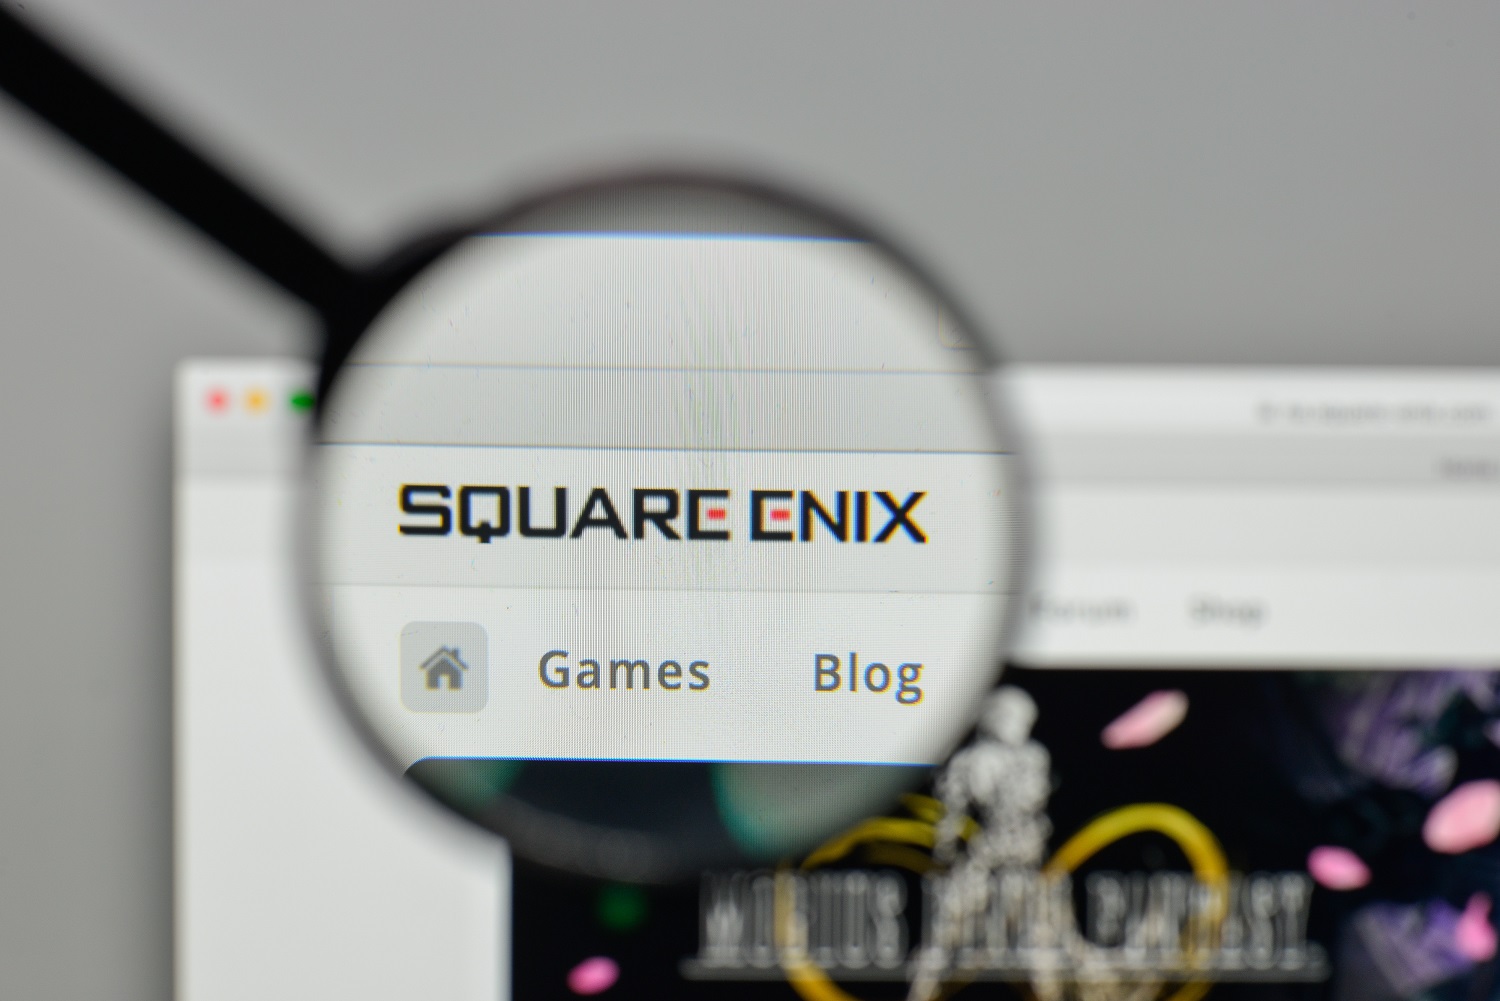 #Square Enix Resolves to Continue with Web3, Blockchain Gaming Drive Crypto #Usa #Miami #Nyc #Houston #Uk #Es